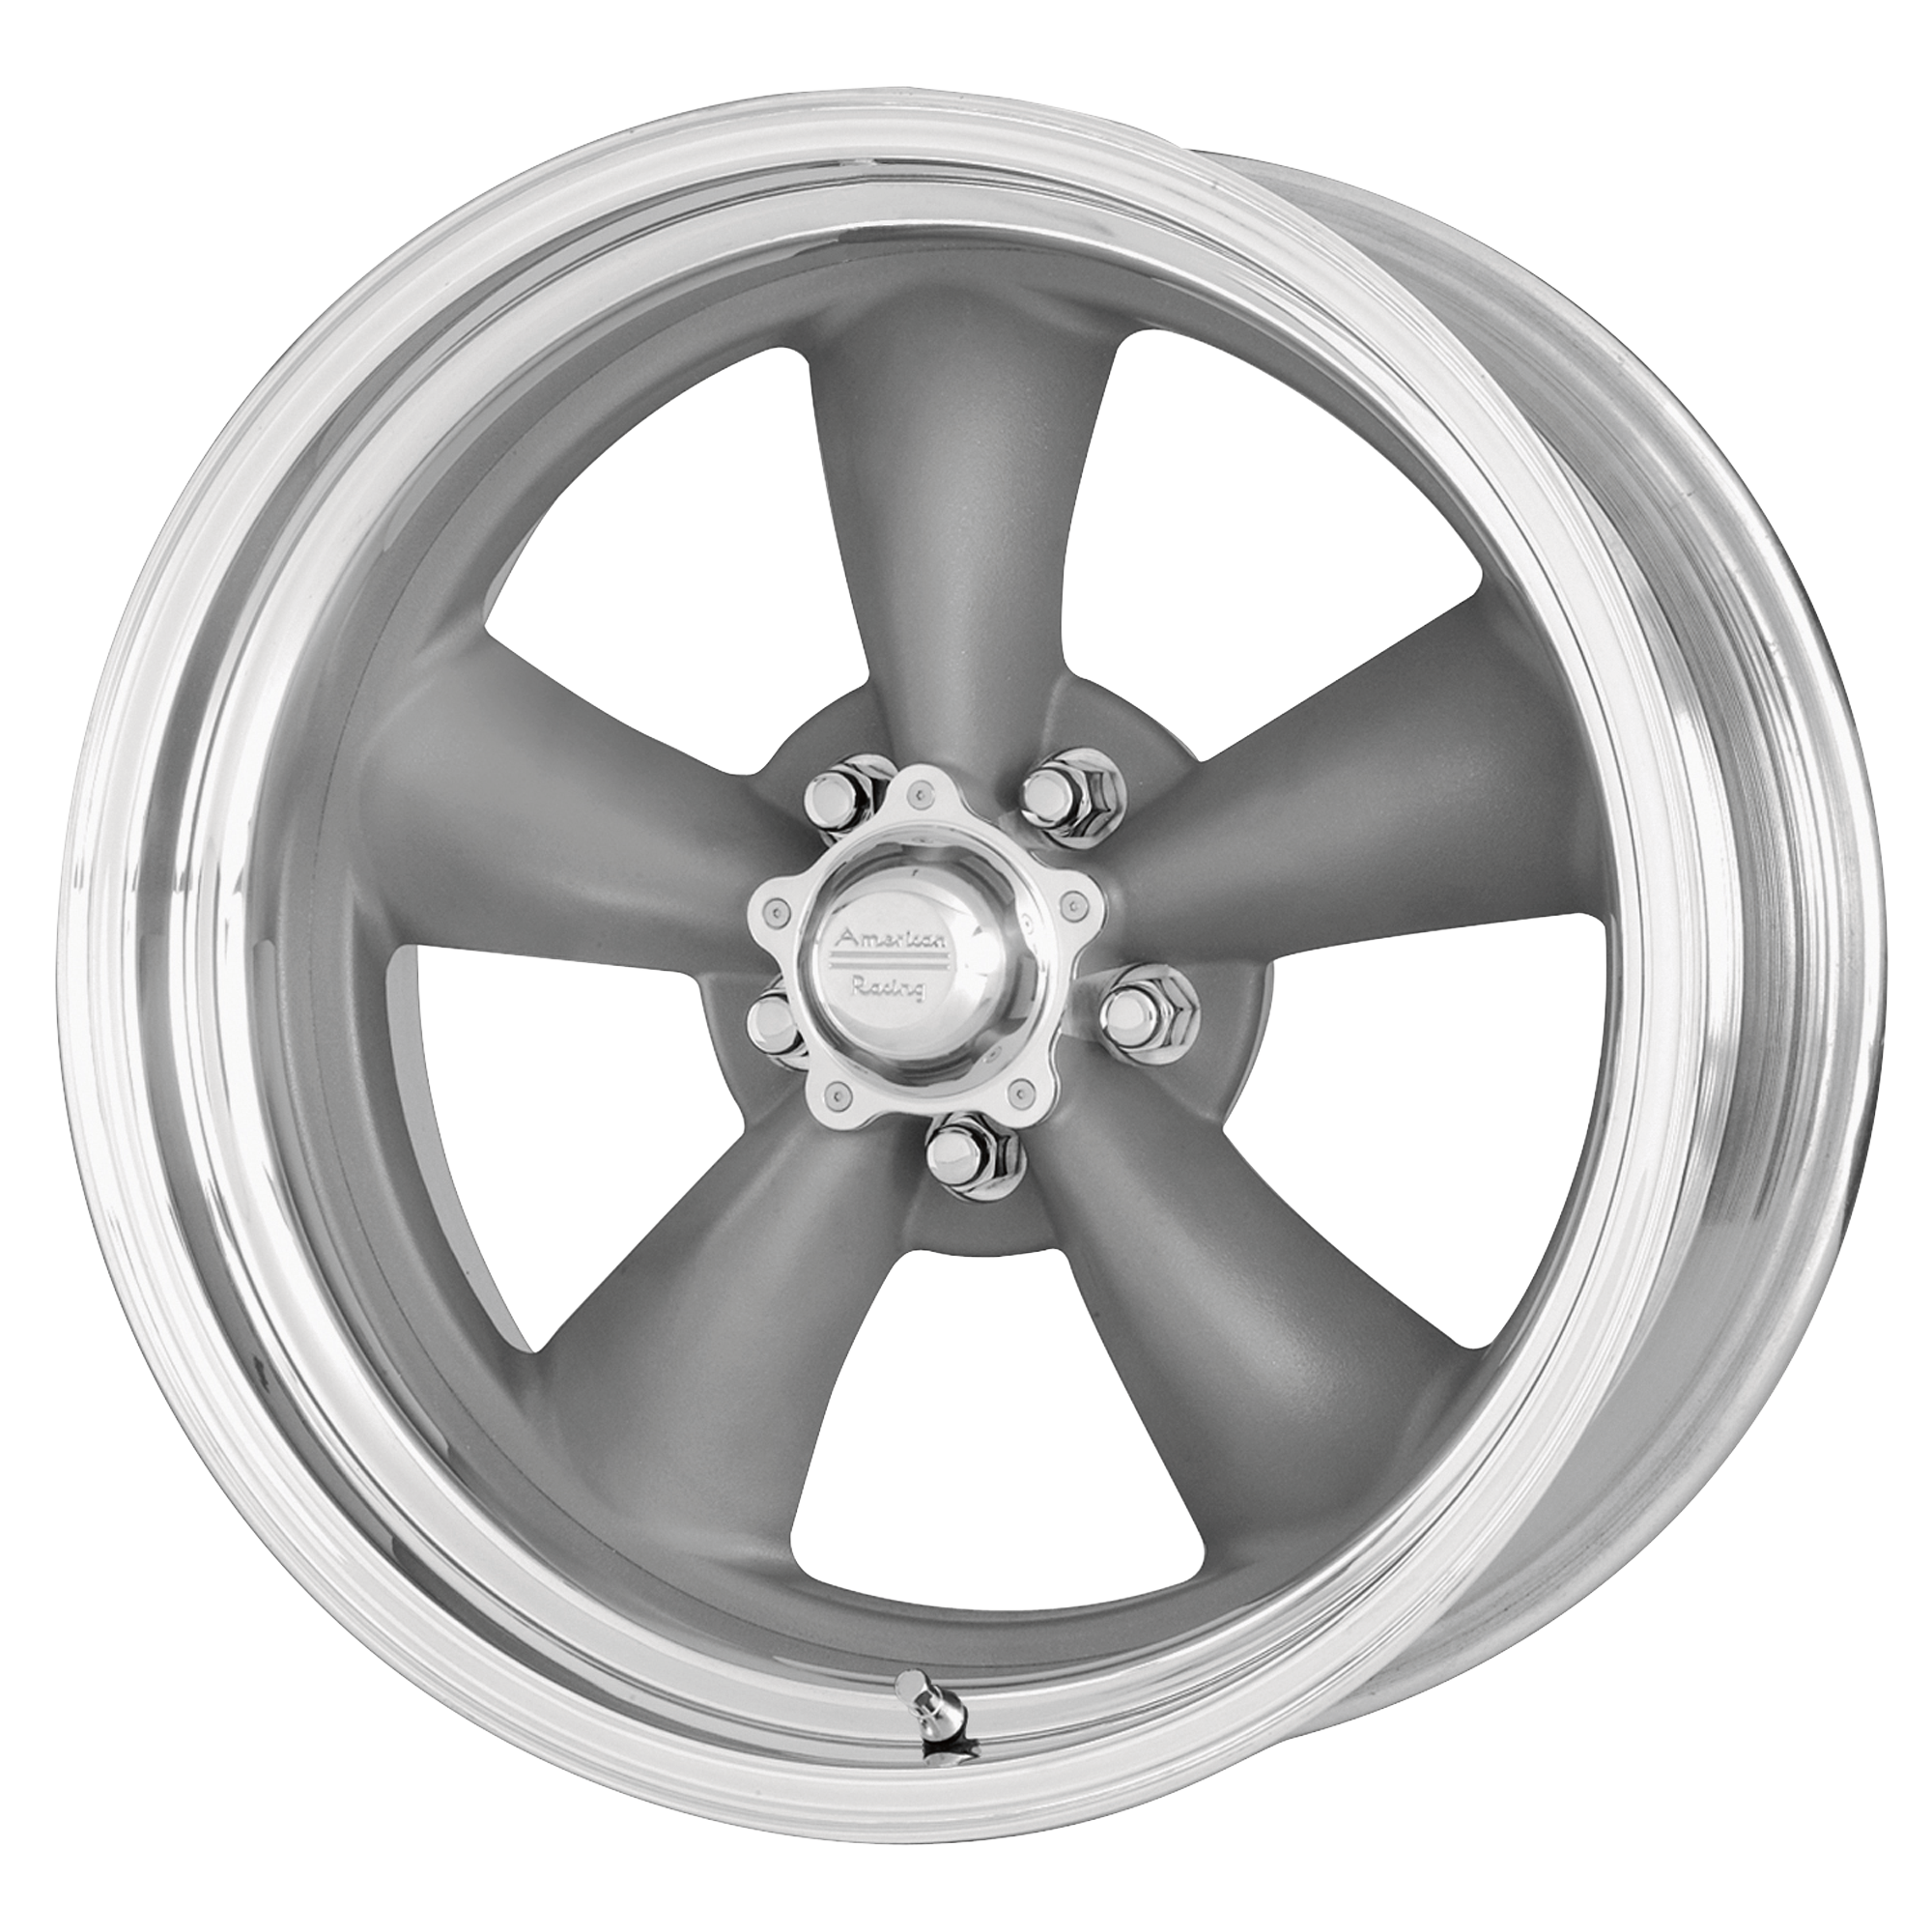 CLASSIC TORQ THRUST II ONE PIECE 18x9 5x114.30 MAG GRAY W/ MACHINED LIP (0 mm) - Tires and Engine Performance